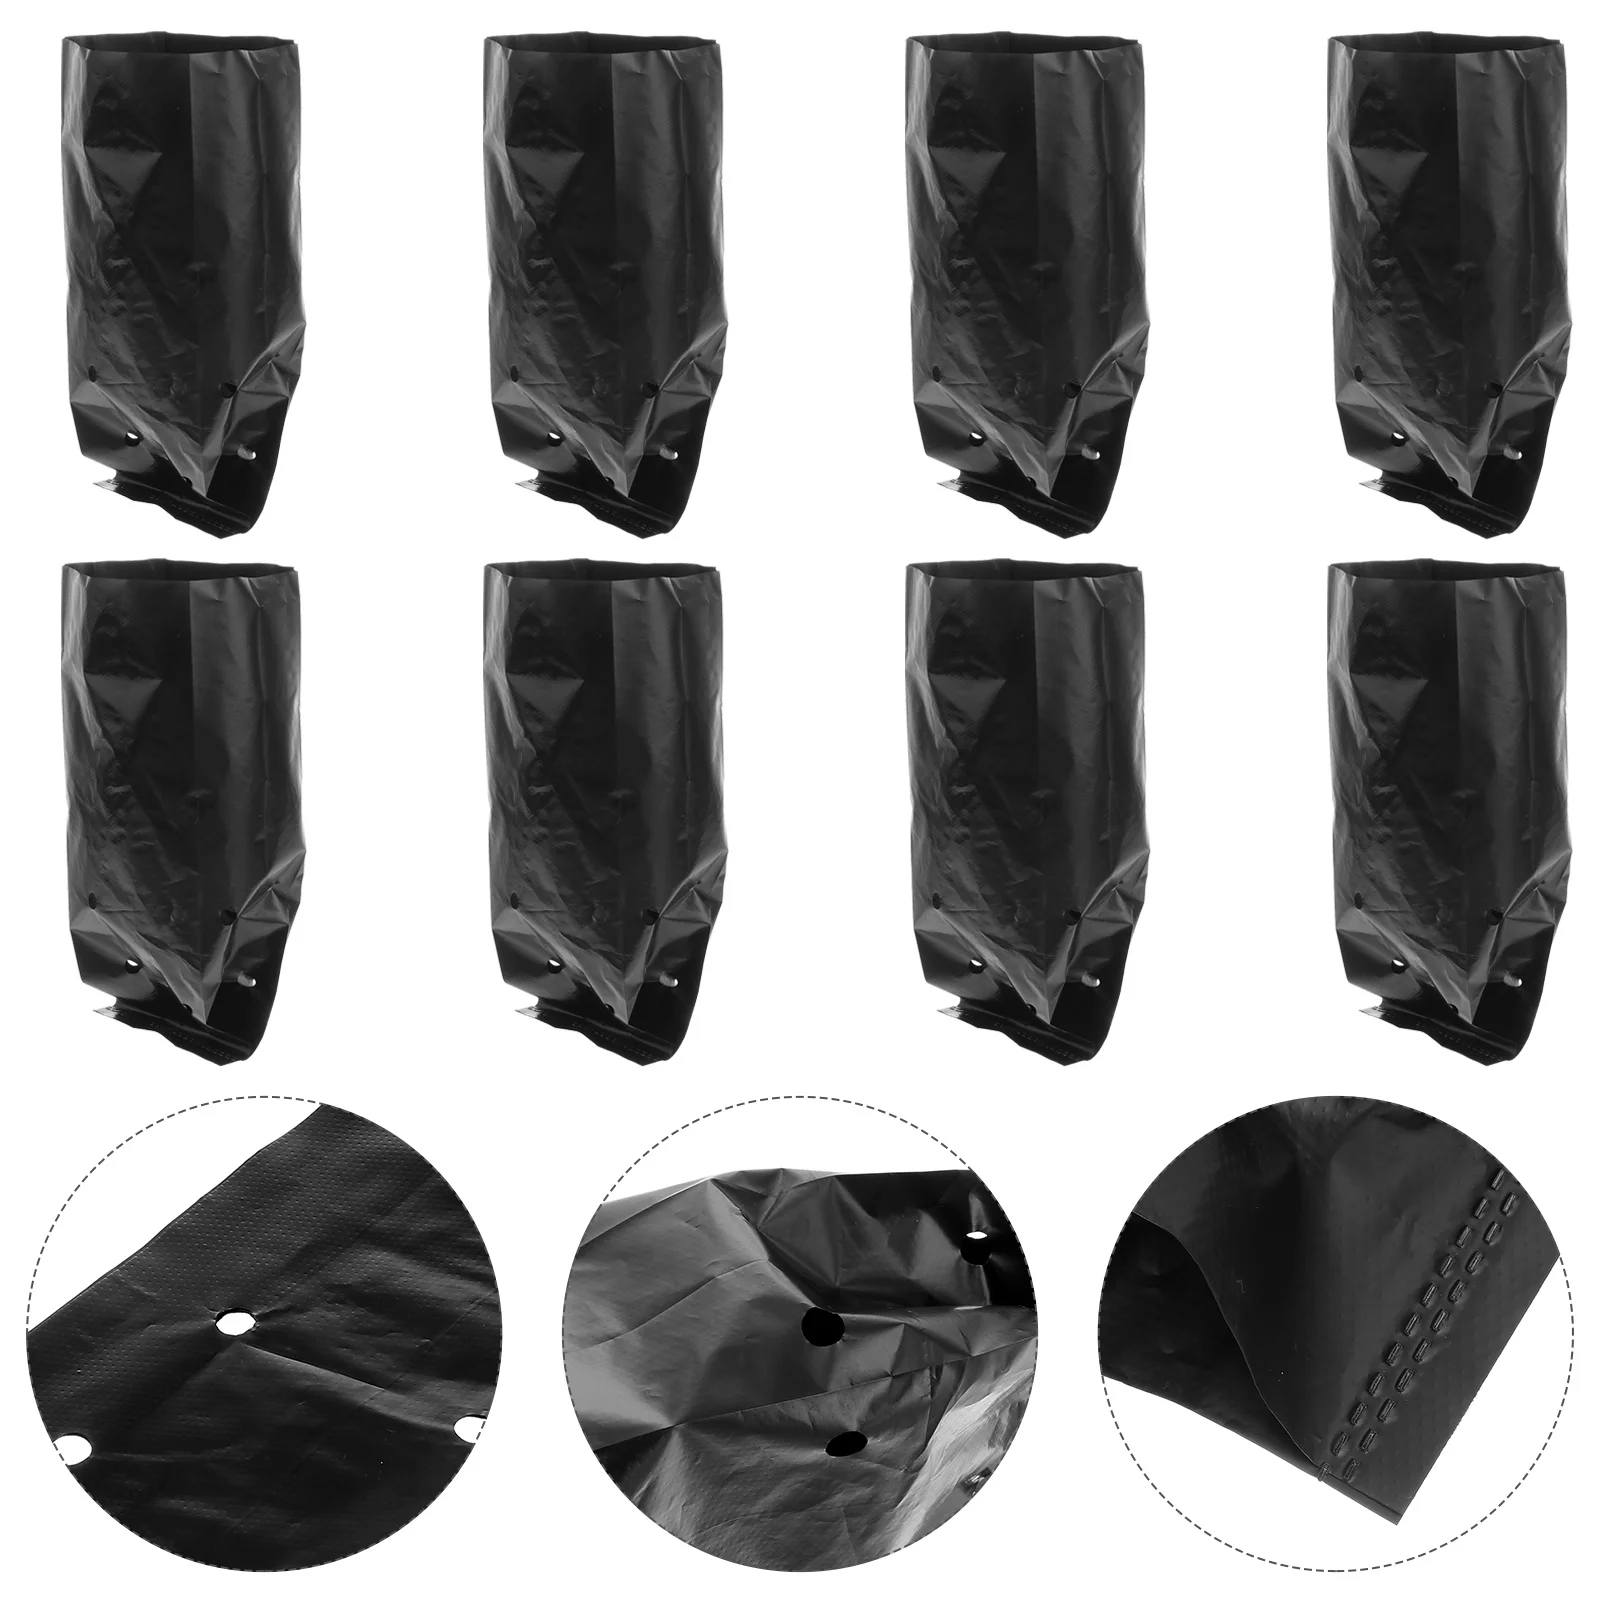 

100 Pcs Thin PE Plastic Nursery Bags Plant Grow Bags Fabric Pots with Breathable Holes for Home Farming Gardening Supplies